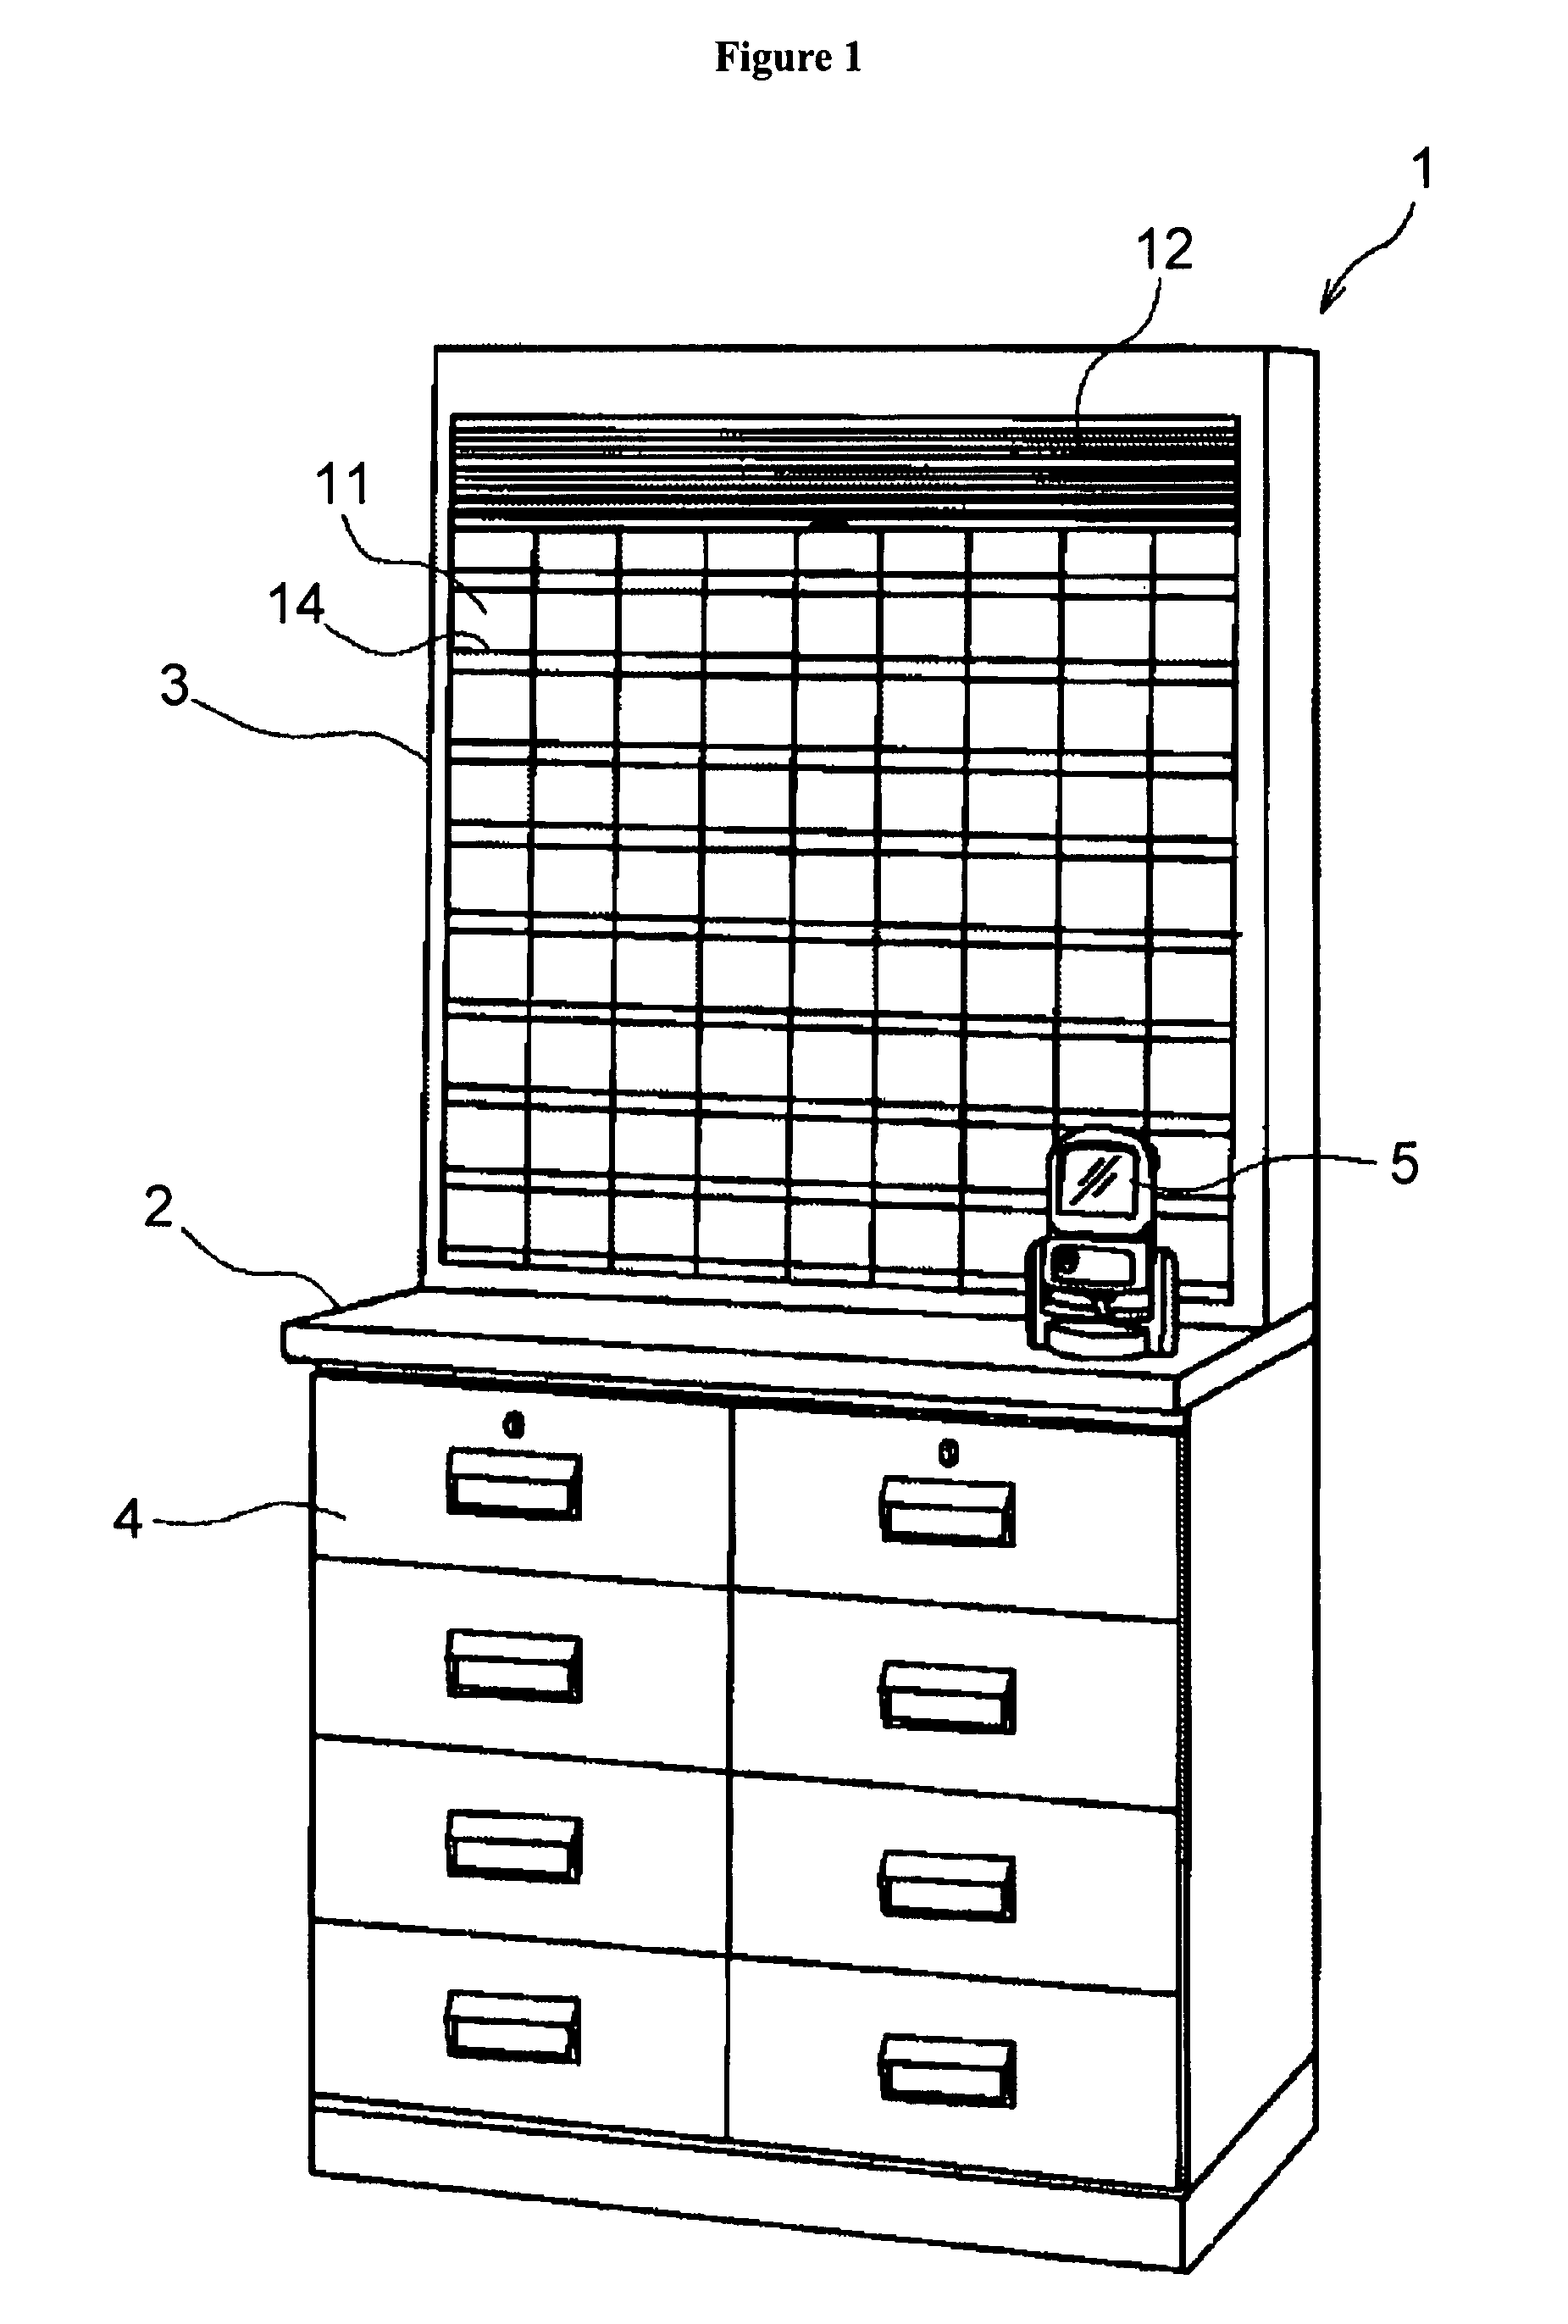 Dispensing support device and dispensing support method